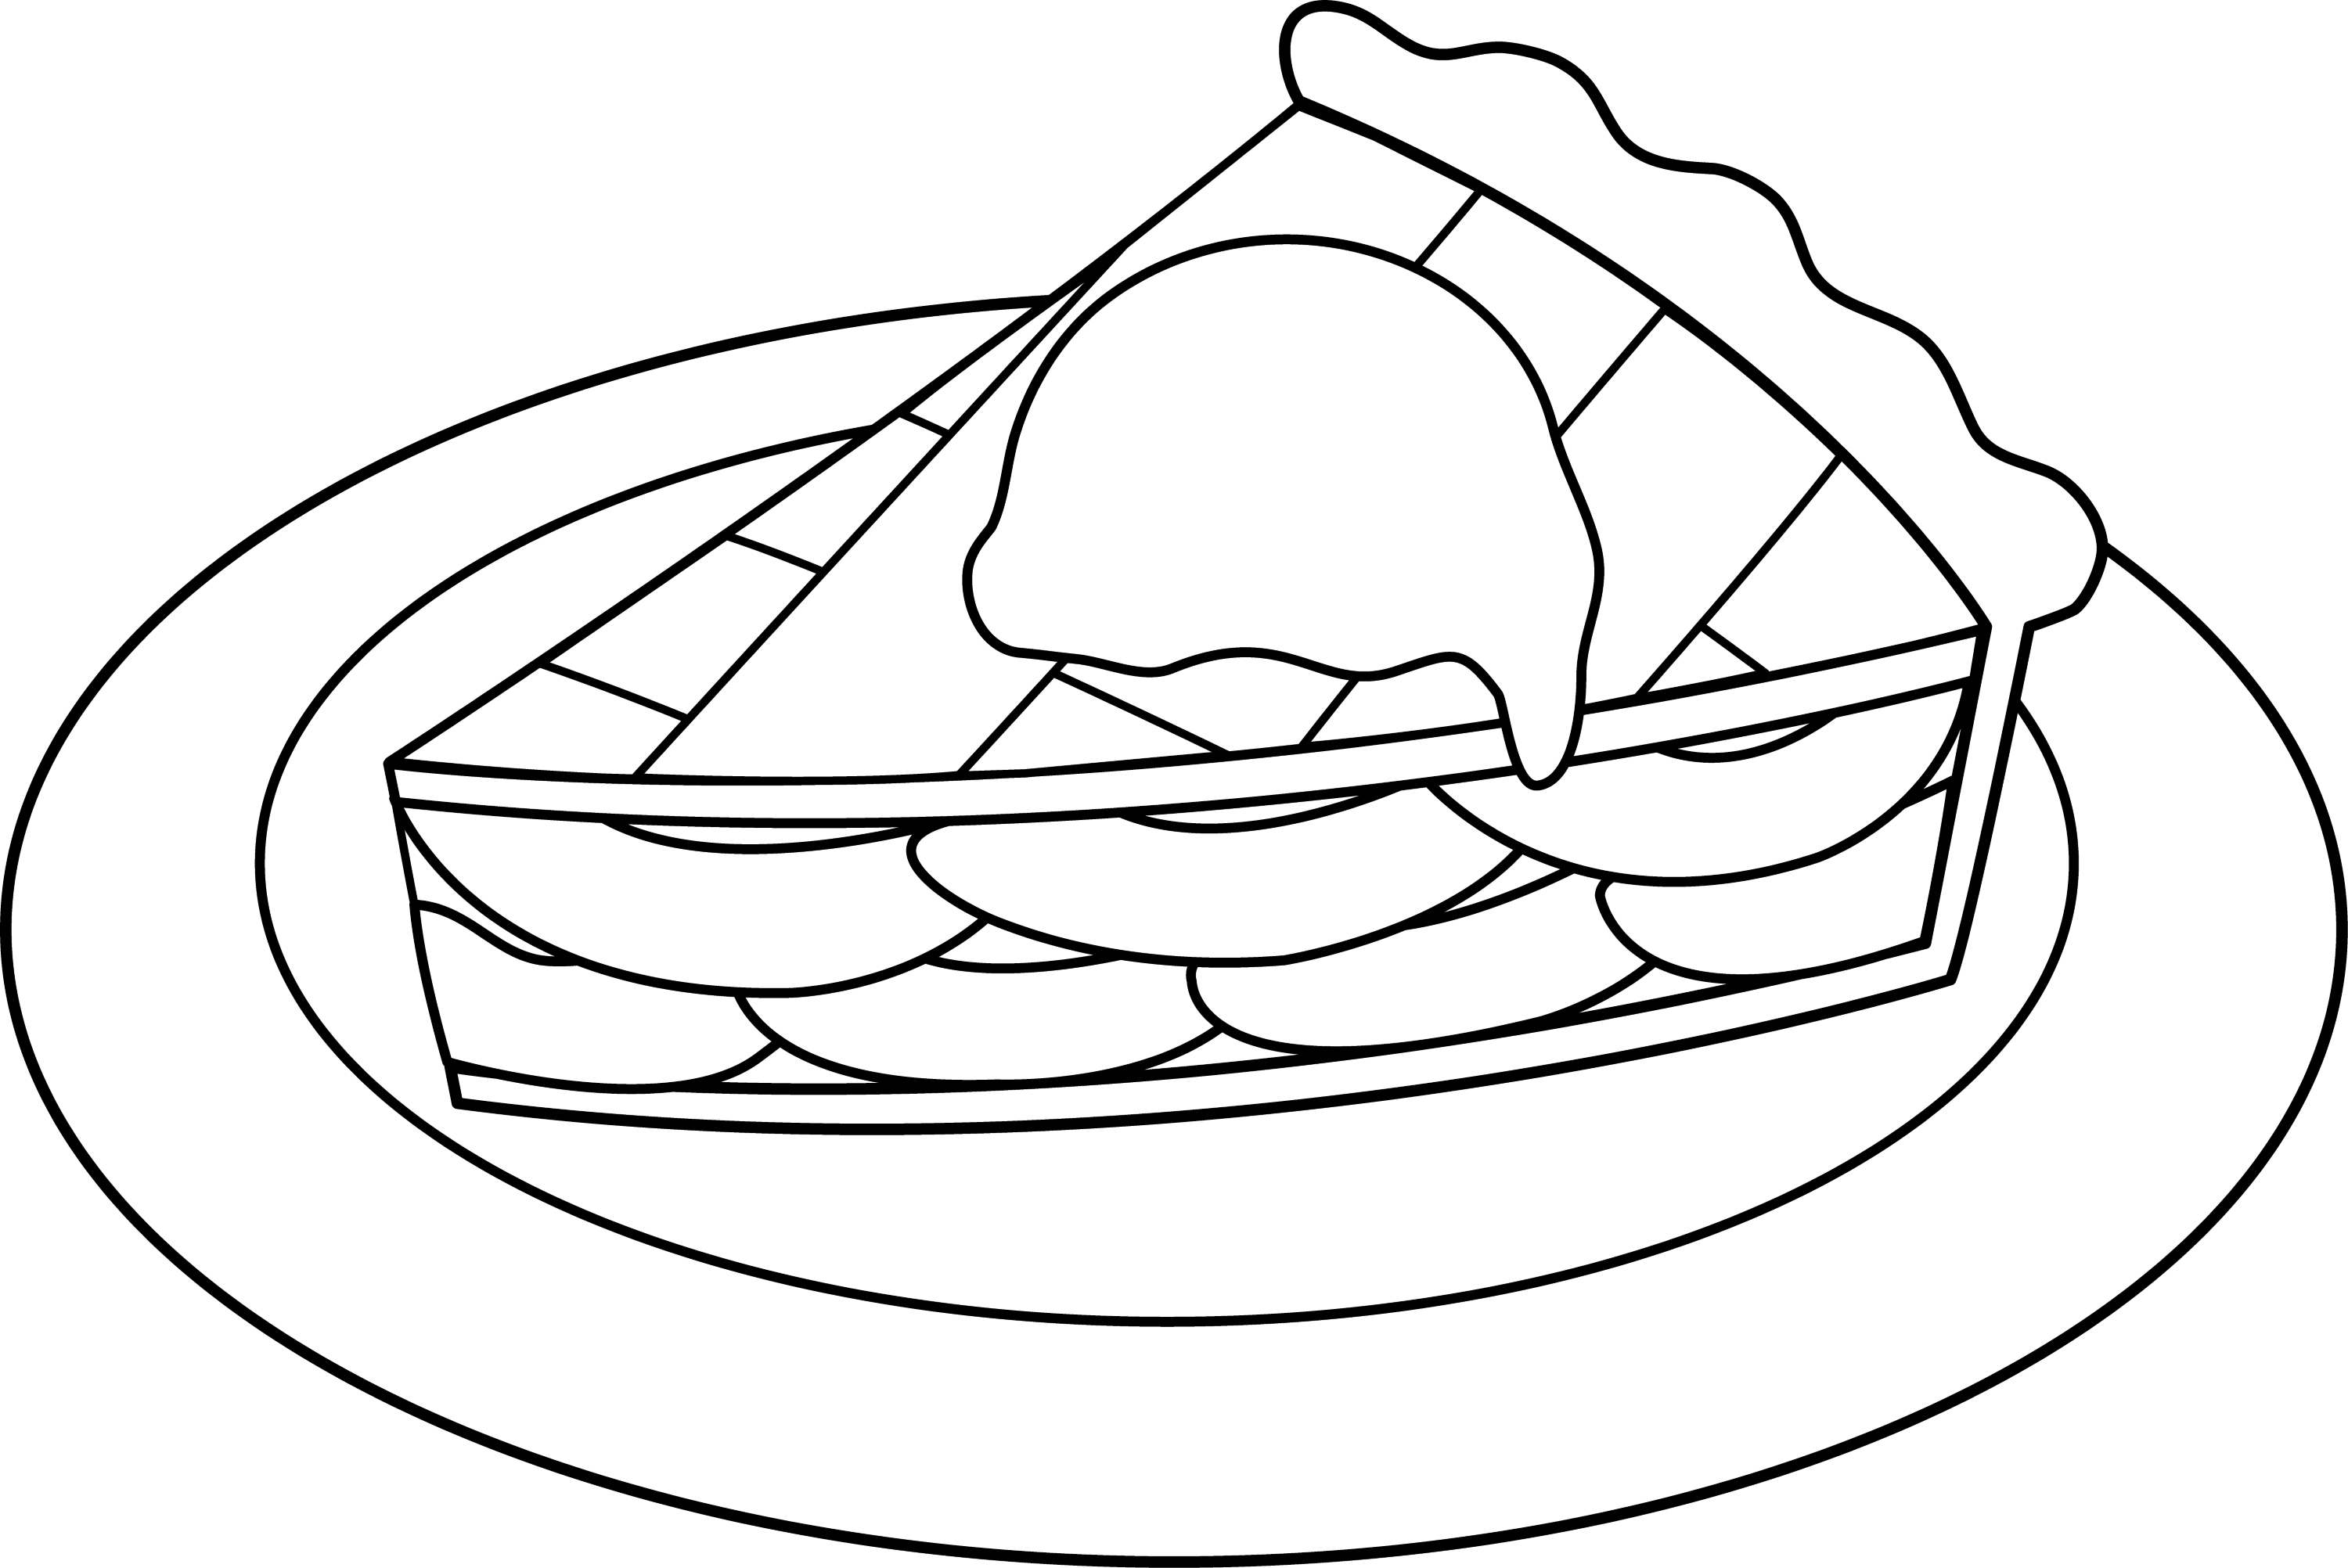 apple pie clipart black and white - photo #2